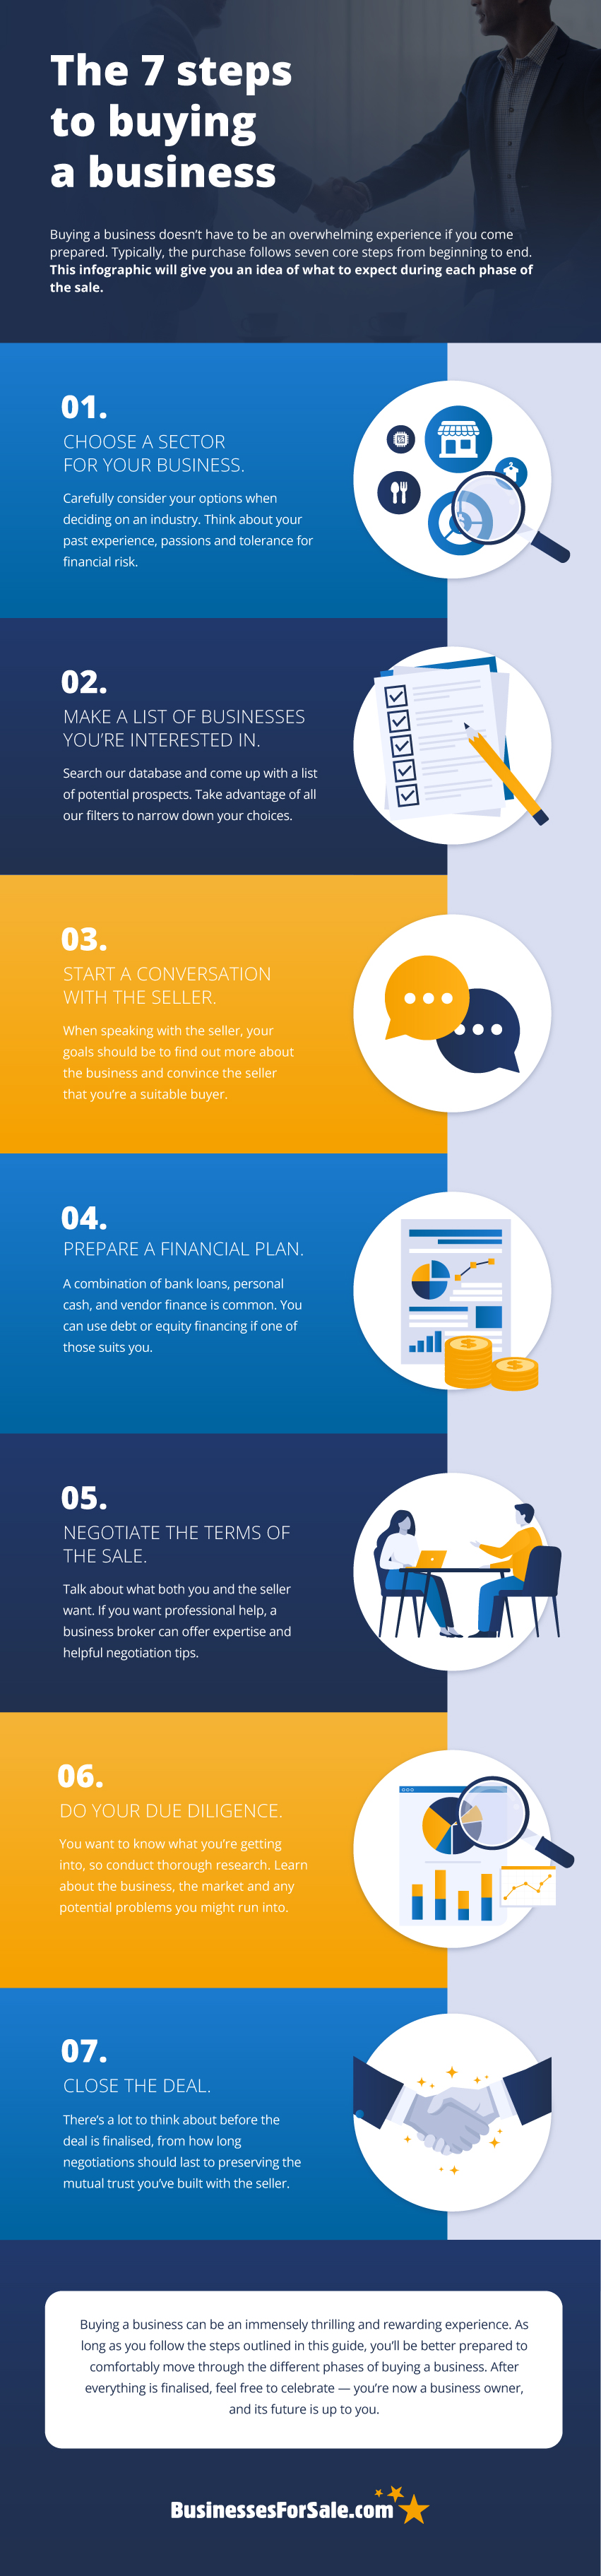 Steps to Buying a Business Infographic